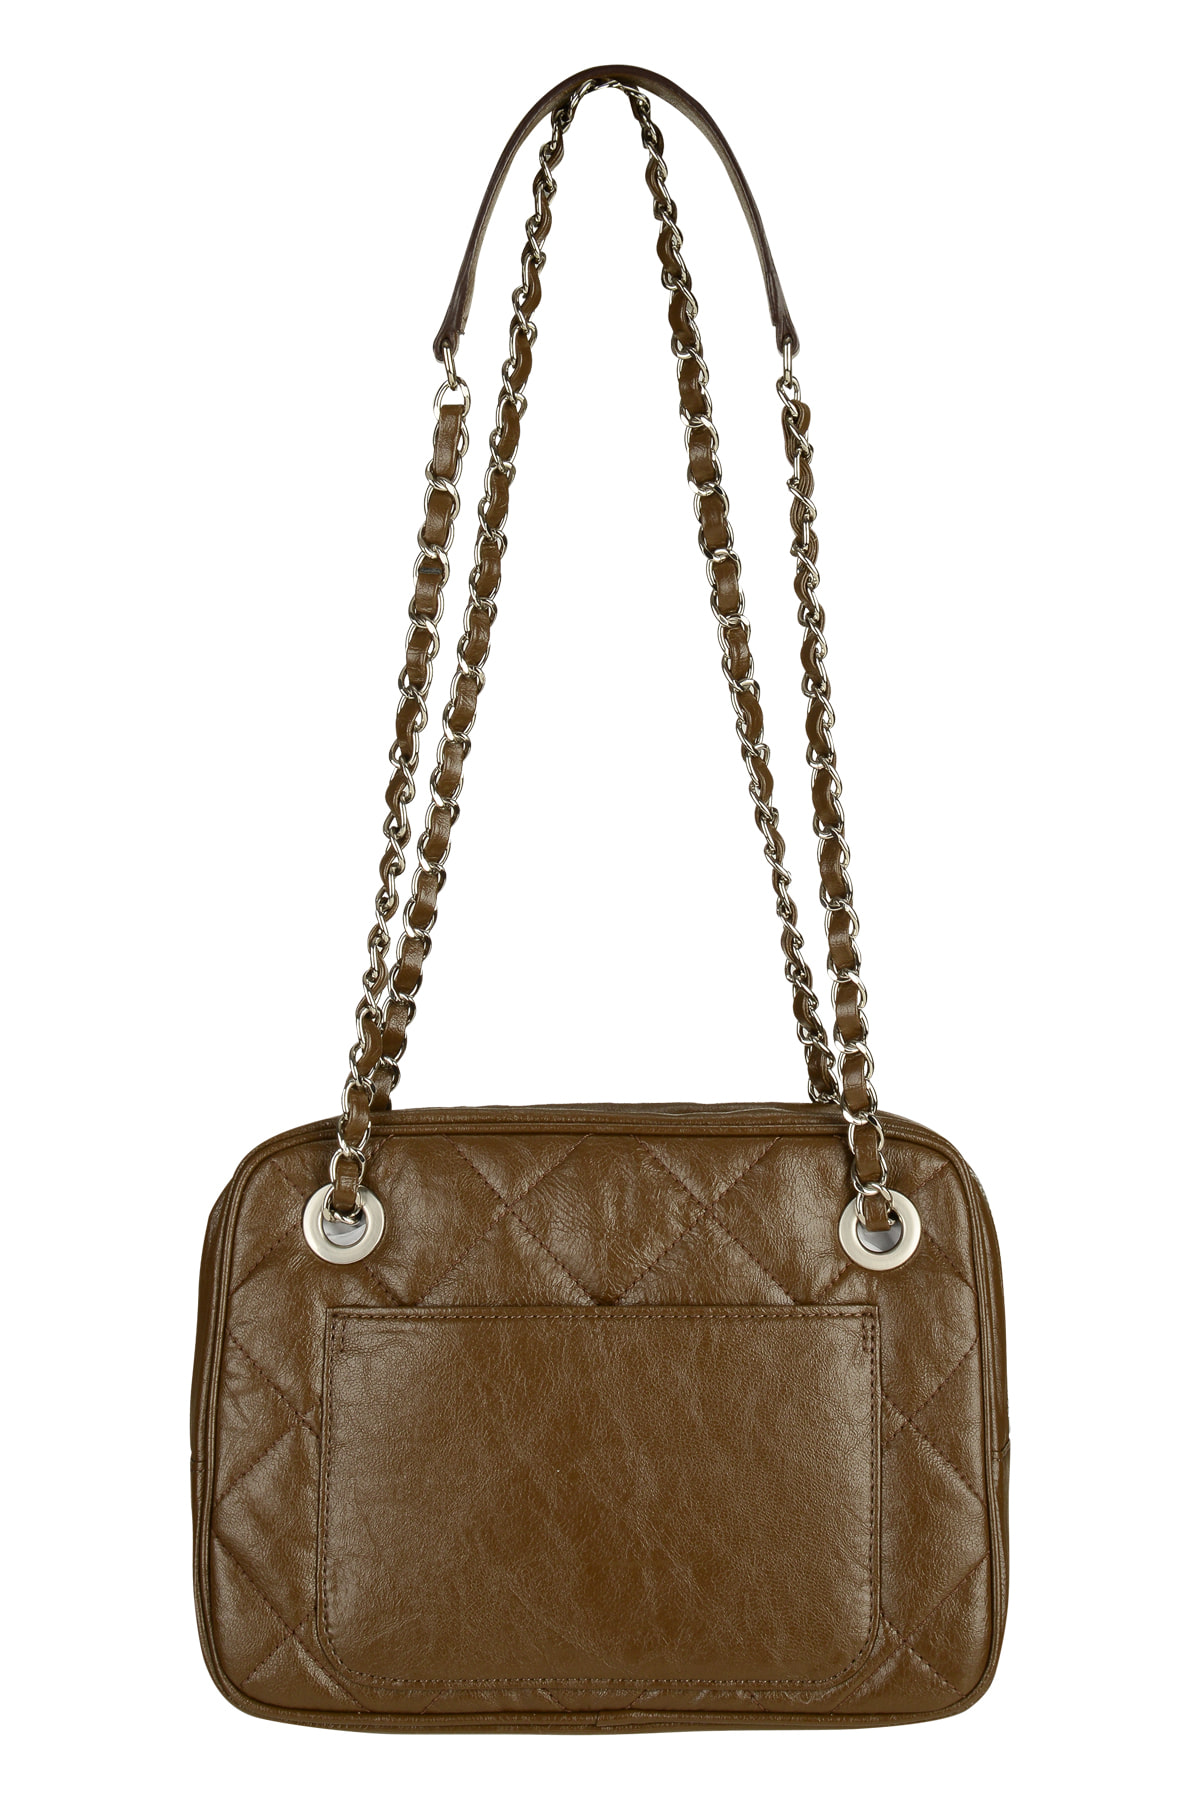 STUD MIDDLE QUILTING BAG IN BROWN